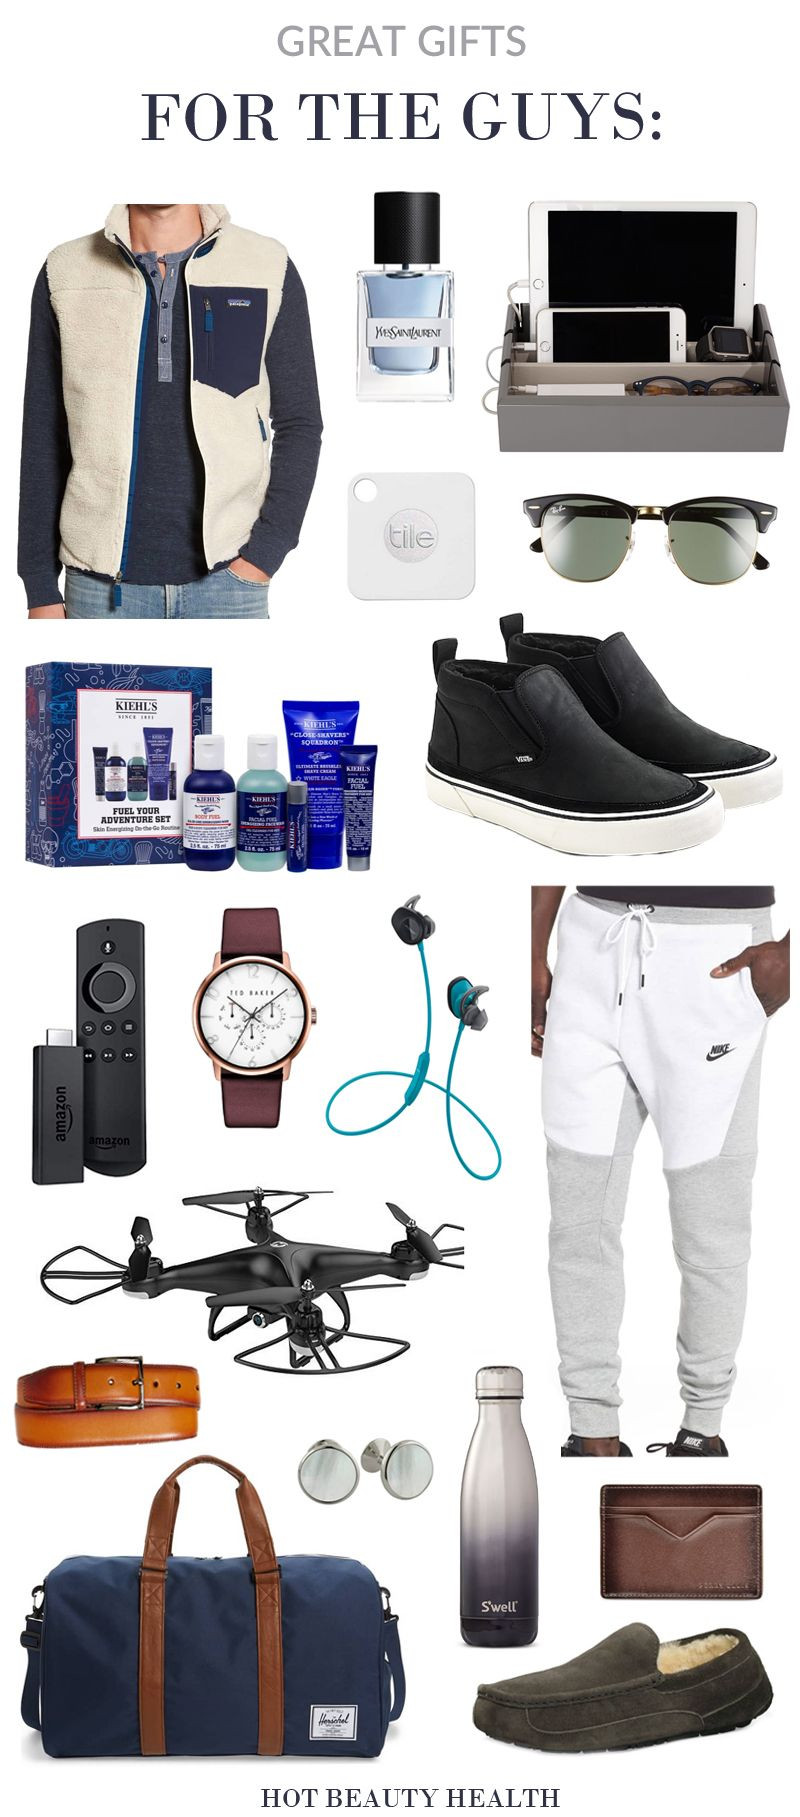 Christmas Gift Ideas For Young Men
 100 Gift Ideas for The Guy s in Your Life